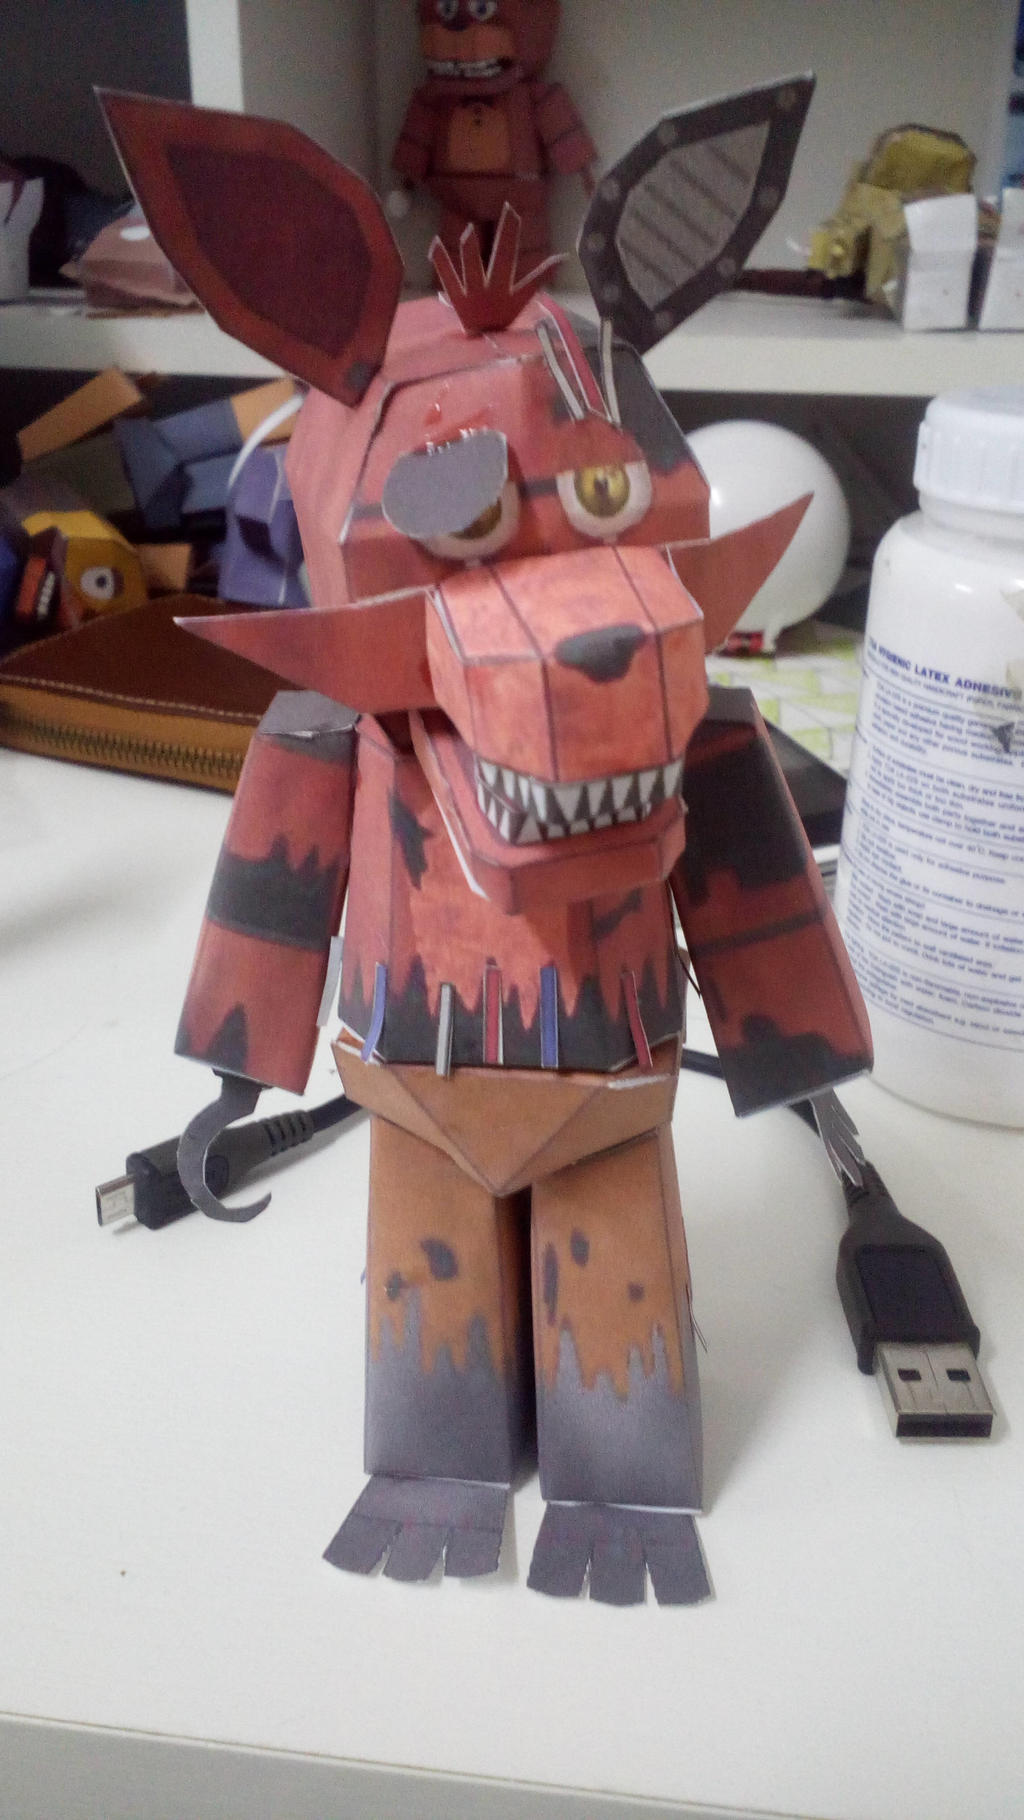 fnaf 2 withered foxy papercraft by jackobonnie1983 on DeviantArt